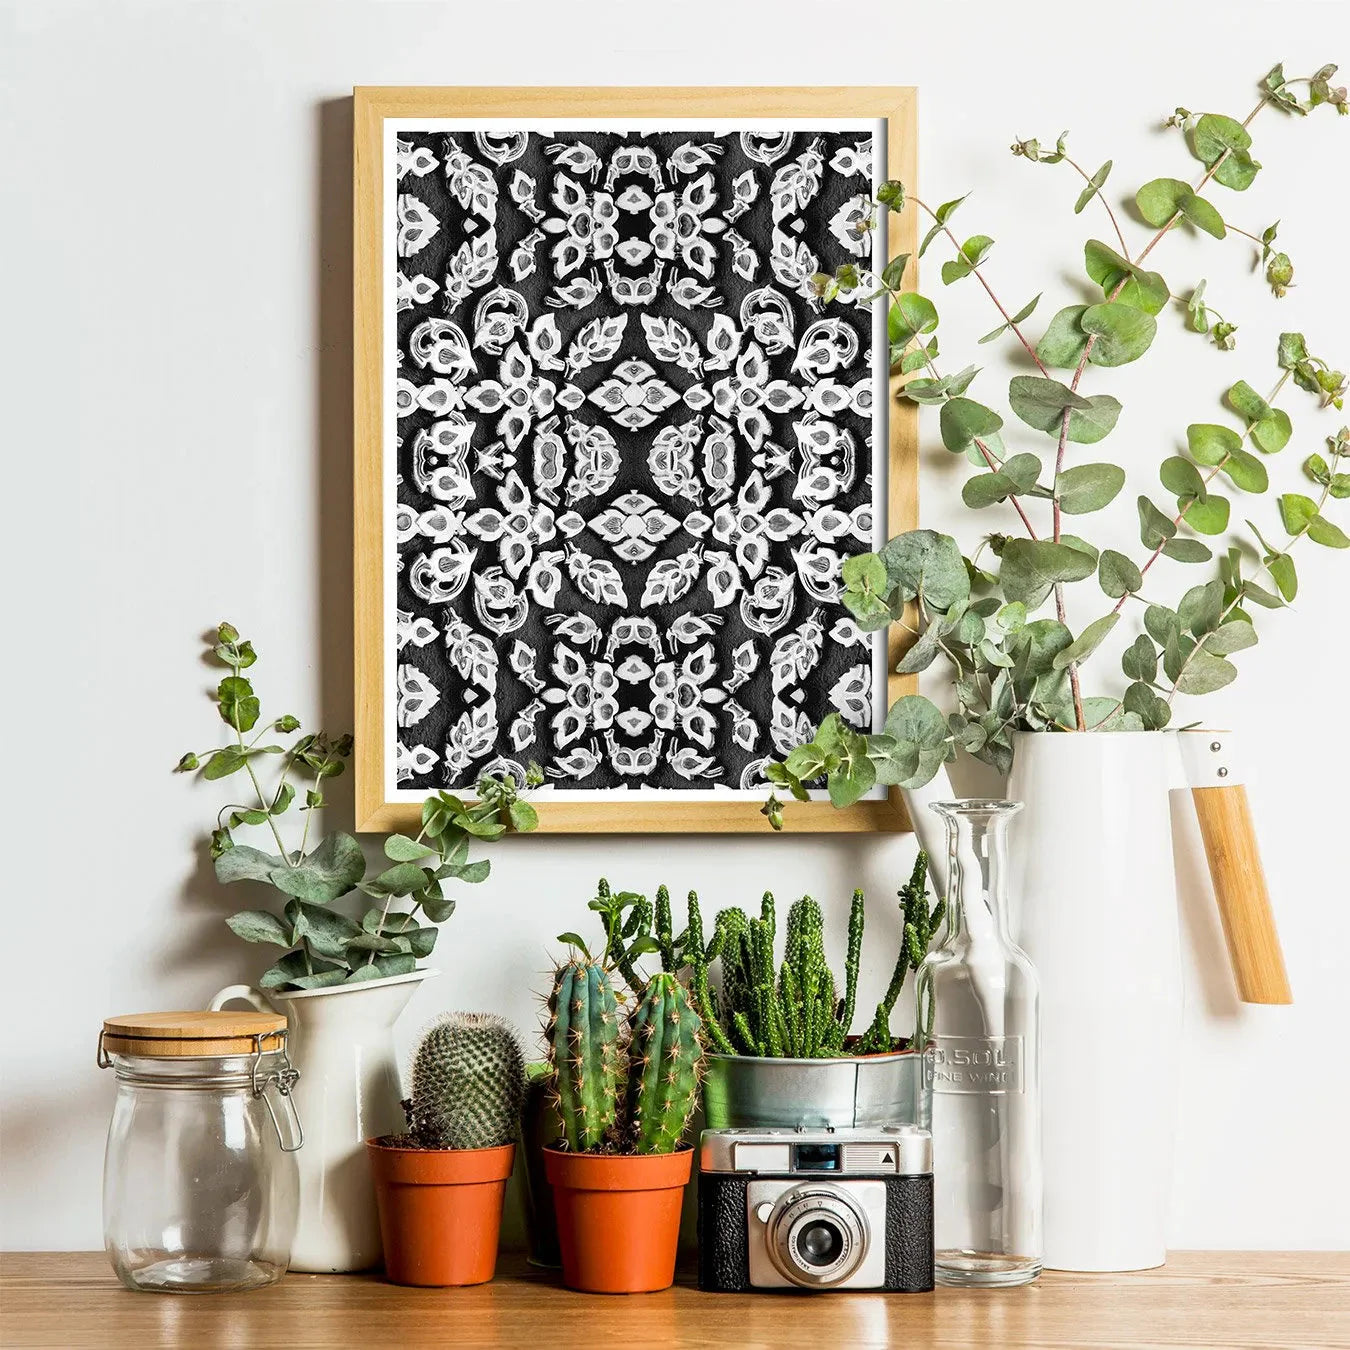 Entering Ayodhya² Giclée Print - Black And White Wall Art - 12×16 - Posters Prints & Visual Artwork - Aesthetic Art